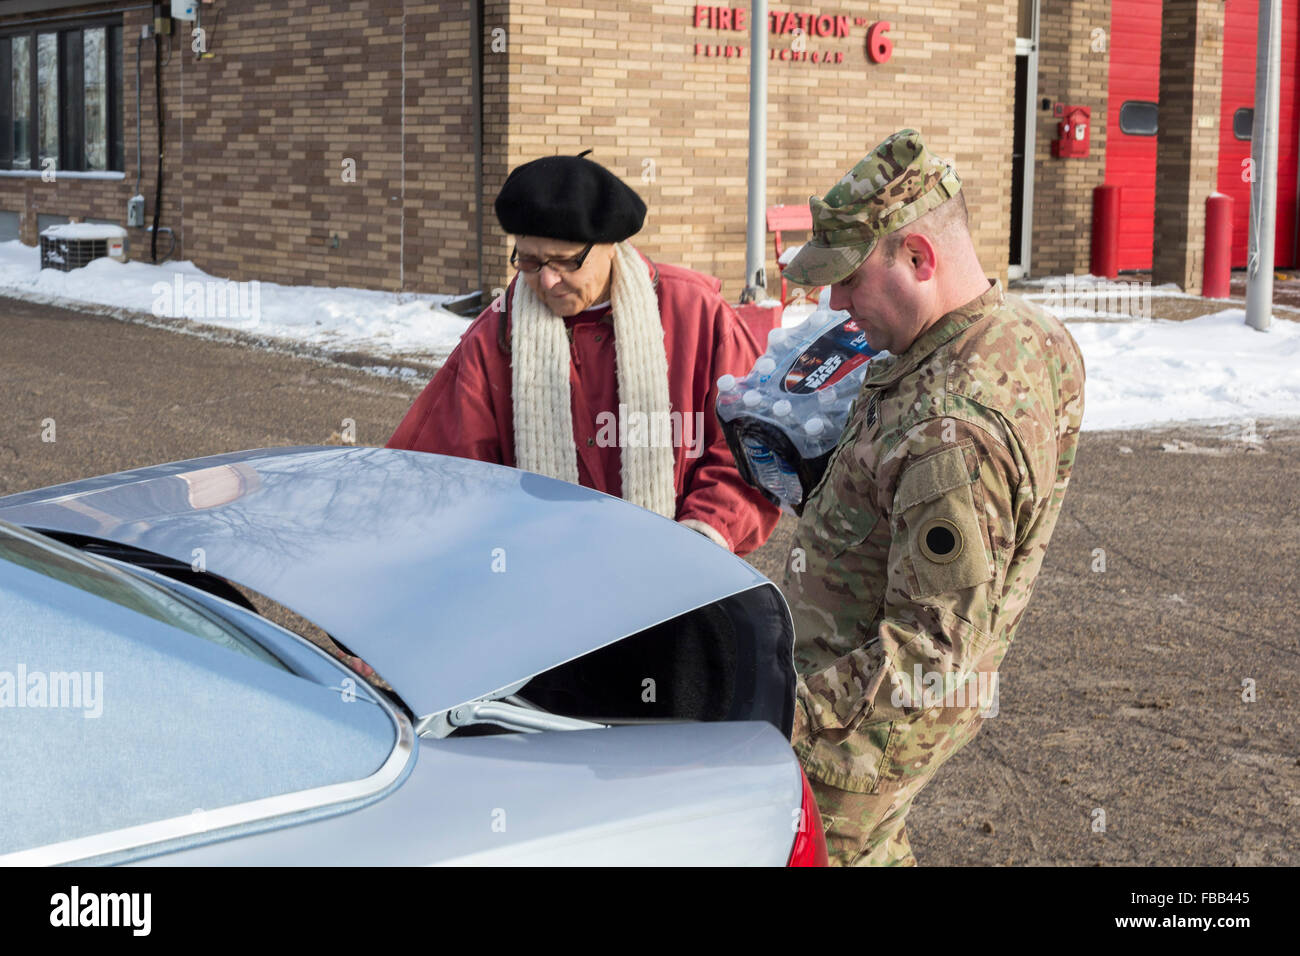 Flint, Michigan USA - 13th January 2016 - Residents pick up bottled water and water filters from Red Cross disaster relief volunteers and National Guard members at Fire Station #6. Water and filters were distributed after cost-cutting by state officials led to high lead levels in the city's water supply. Credit:  Jim West/Alamy Live News Stock Photo